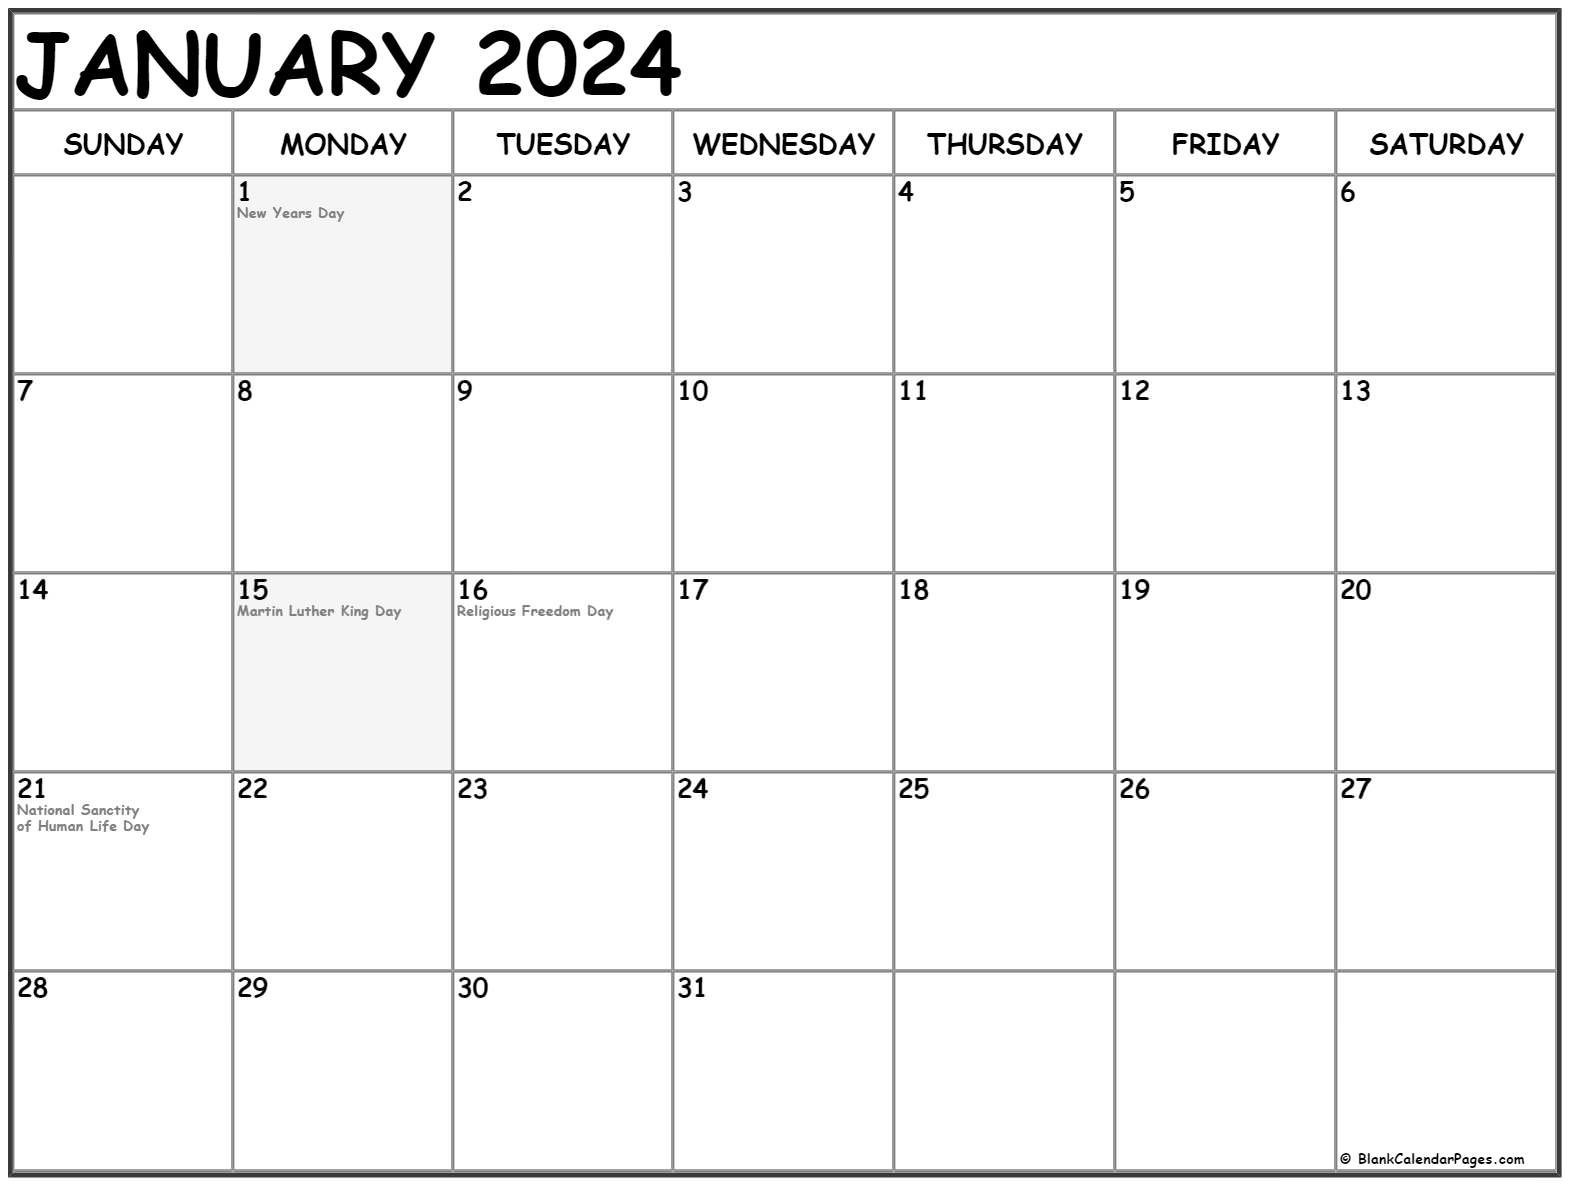 Collection Of January 2020 Calendars With Holidays